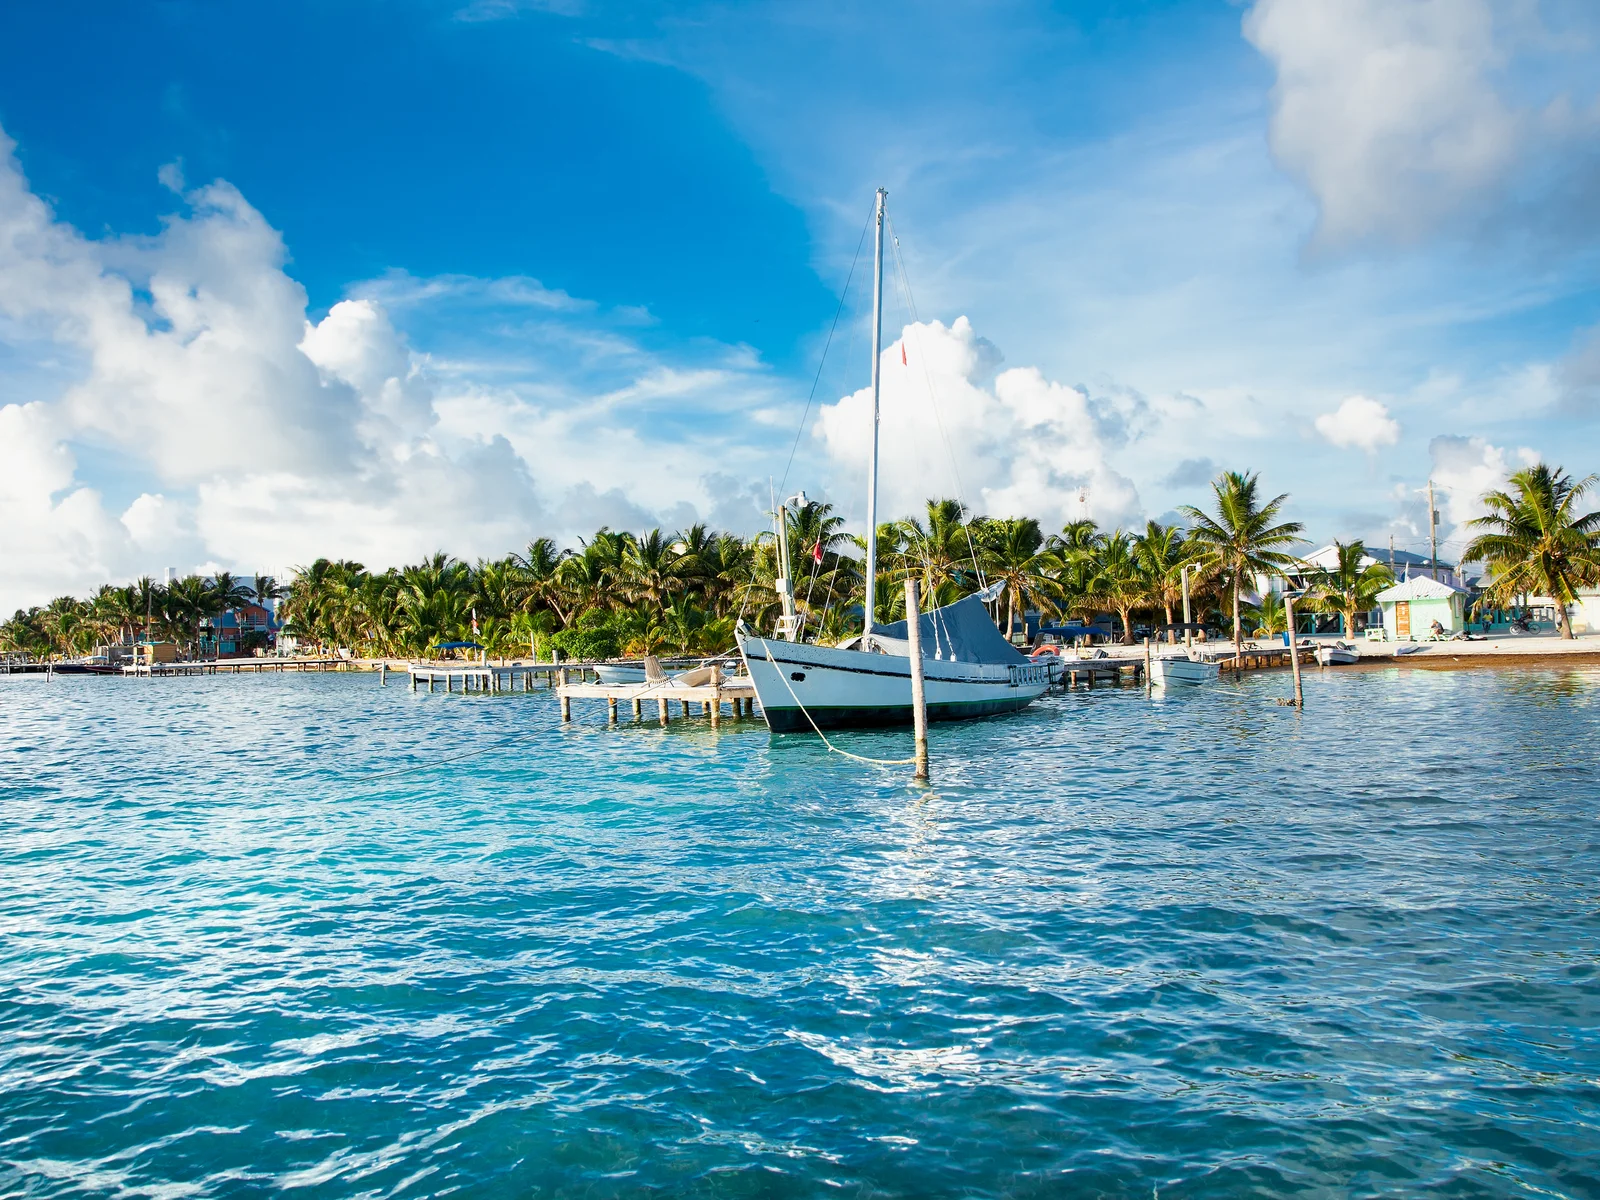 Sailboat in a bay pictured during the best time to visit Belize with blue sky and warm temps